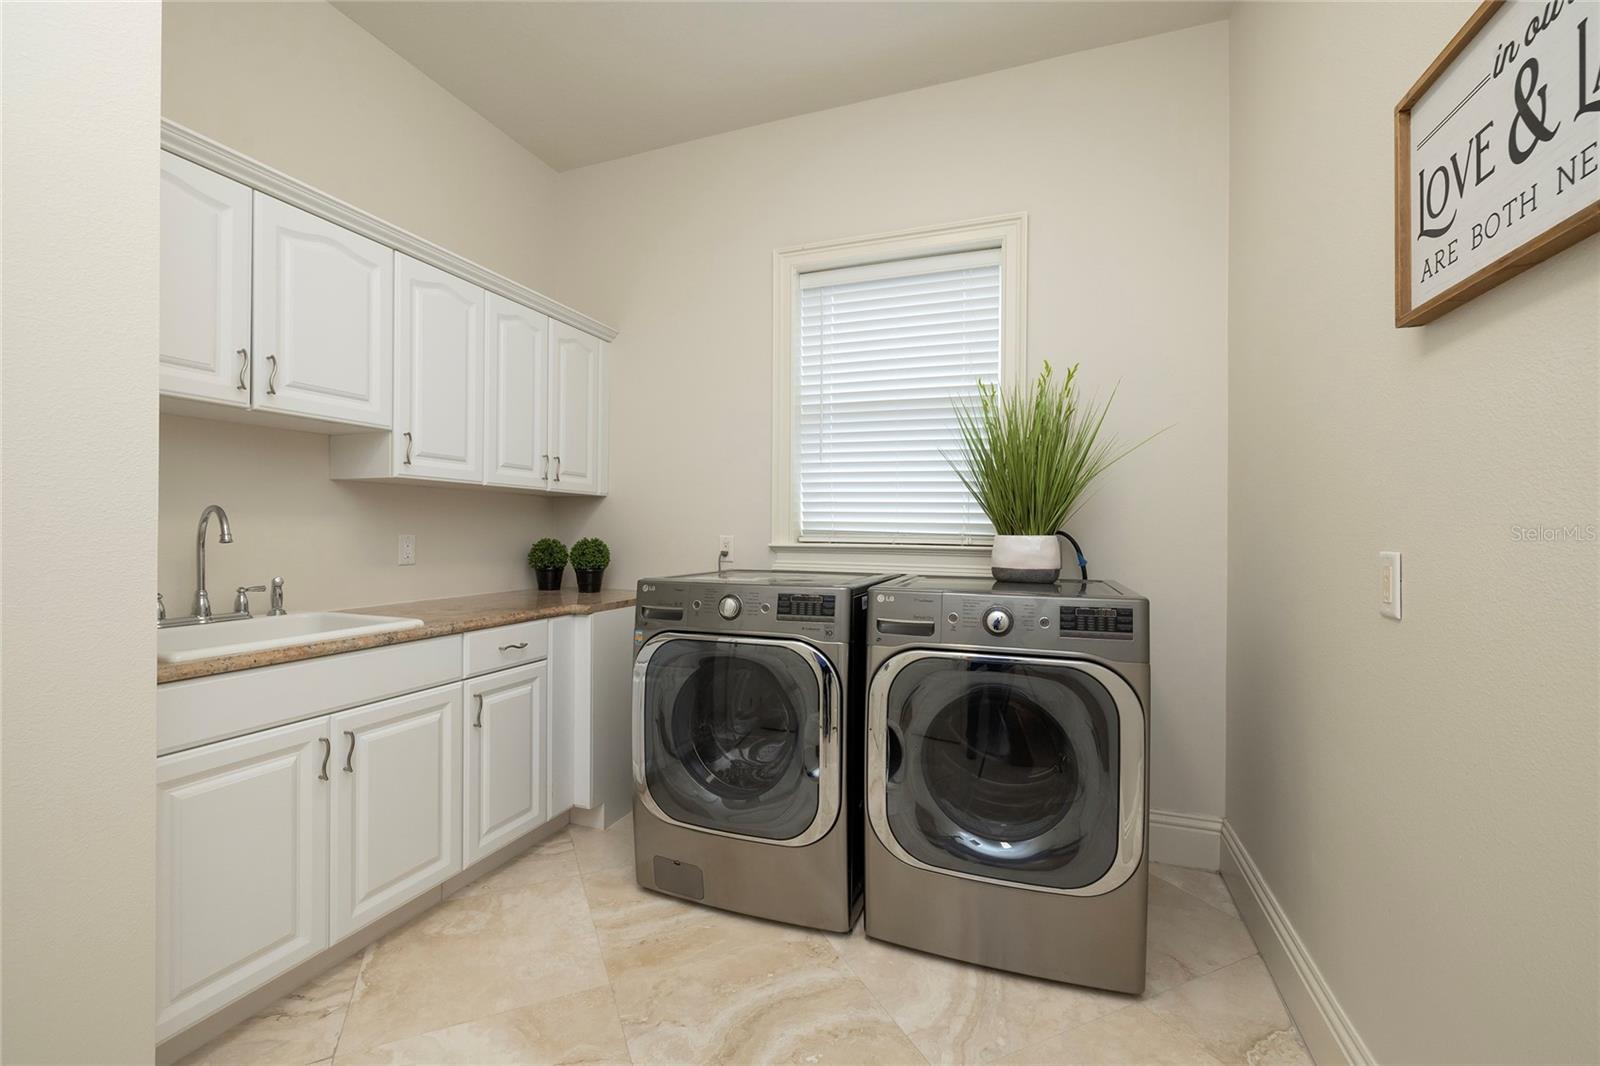 Laundry room with laundry shoot from second floor, utility sink, storage cabinets, and closet.